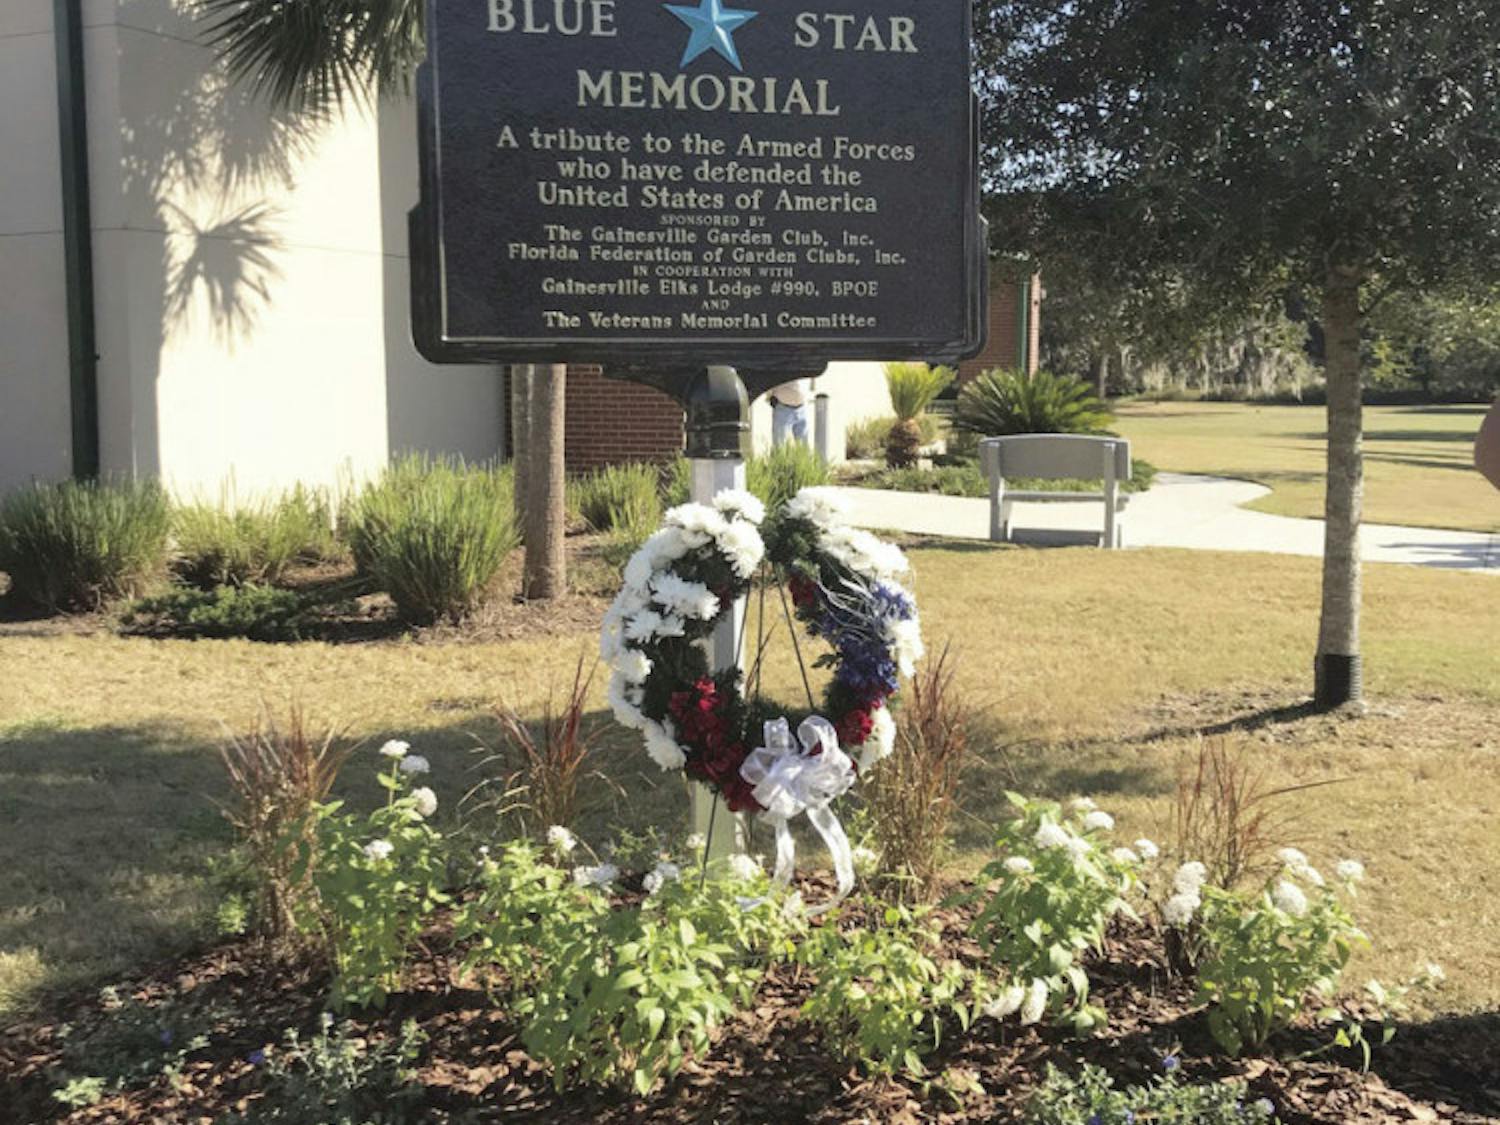 A Blue Star Memorial Marker was unveiled at Veterans Memorial Park, located at 7400 SW 41st Place, on Saturday morning. It’s the third memorial marker in Alachua County.